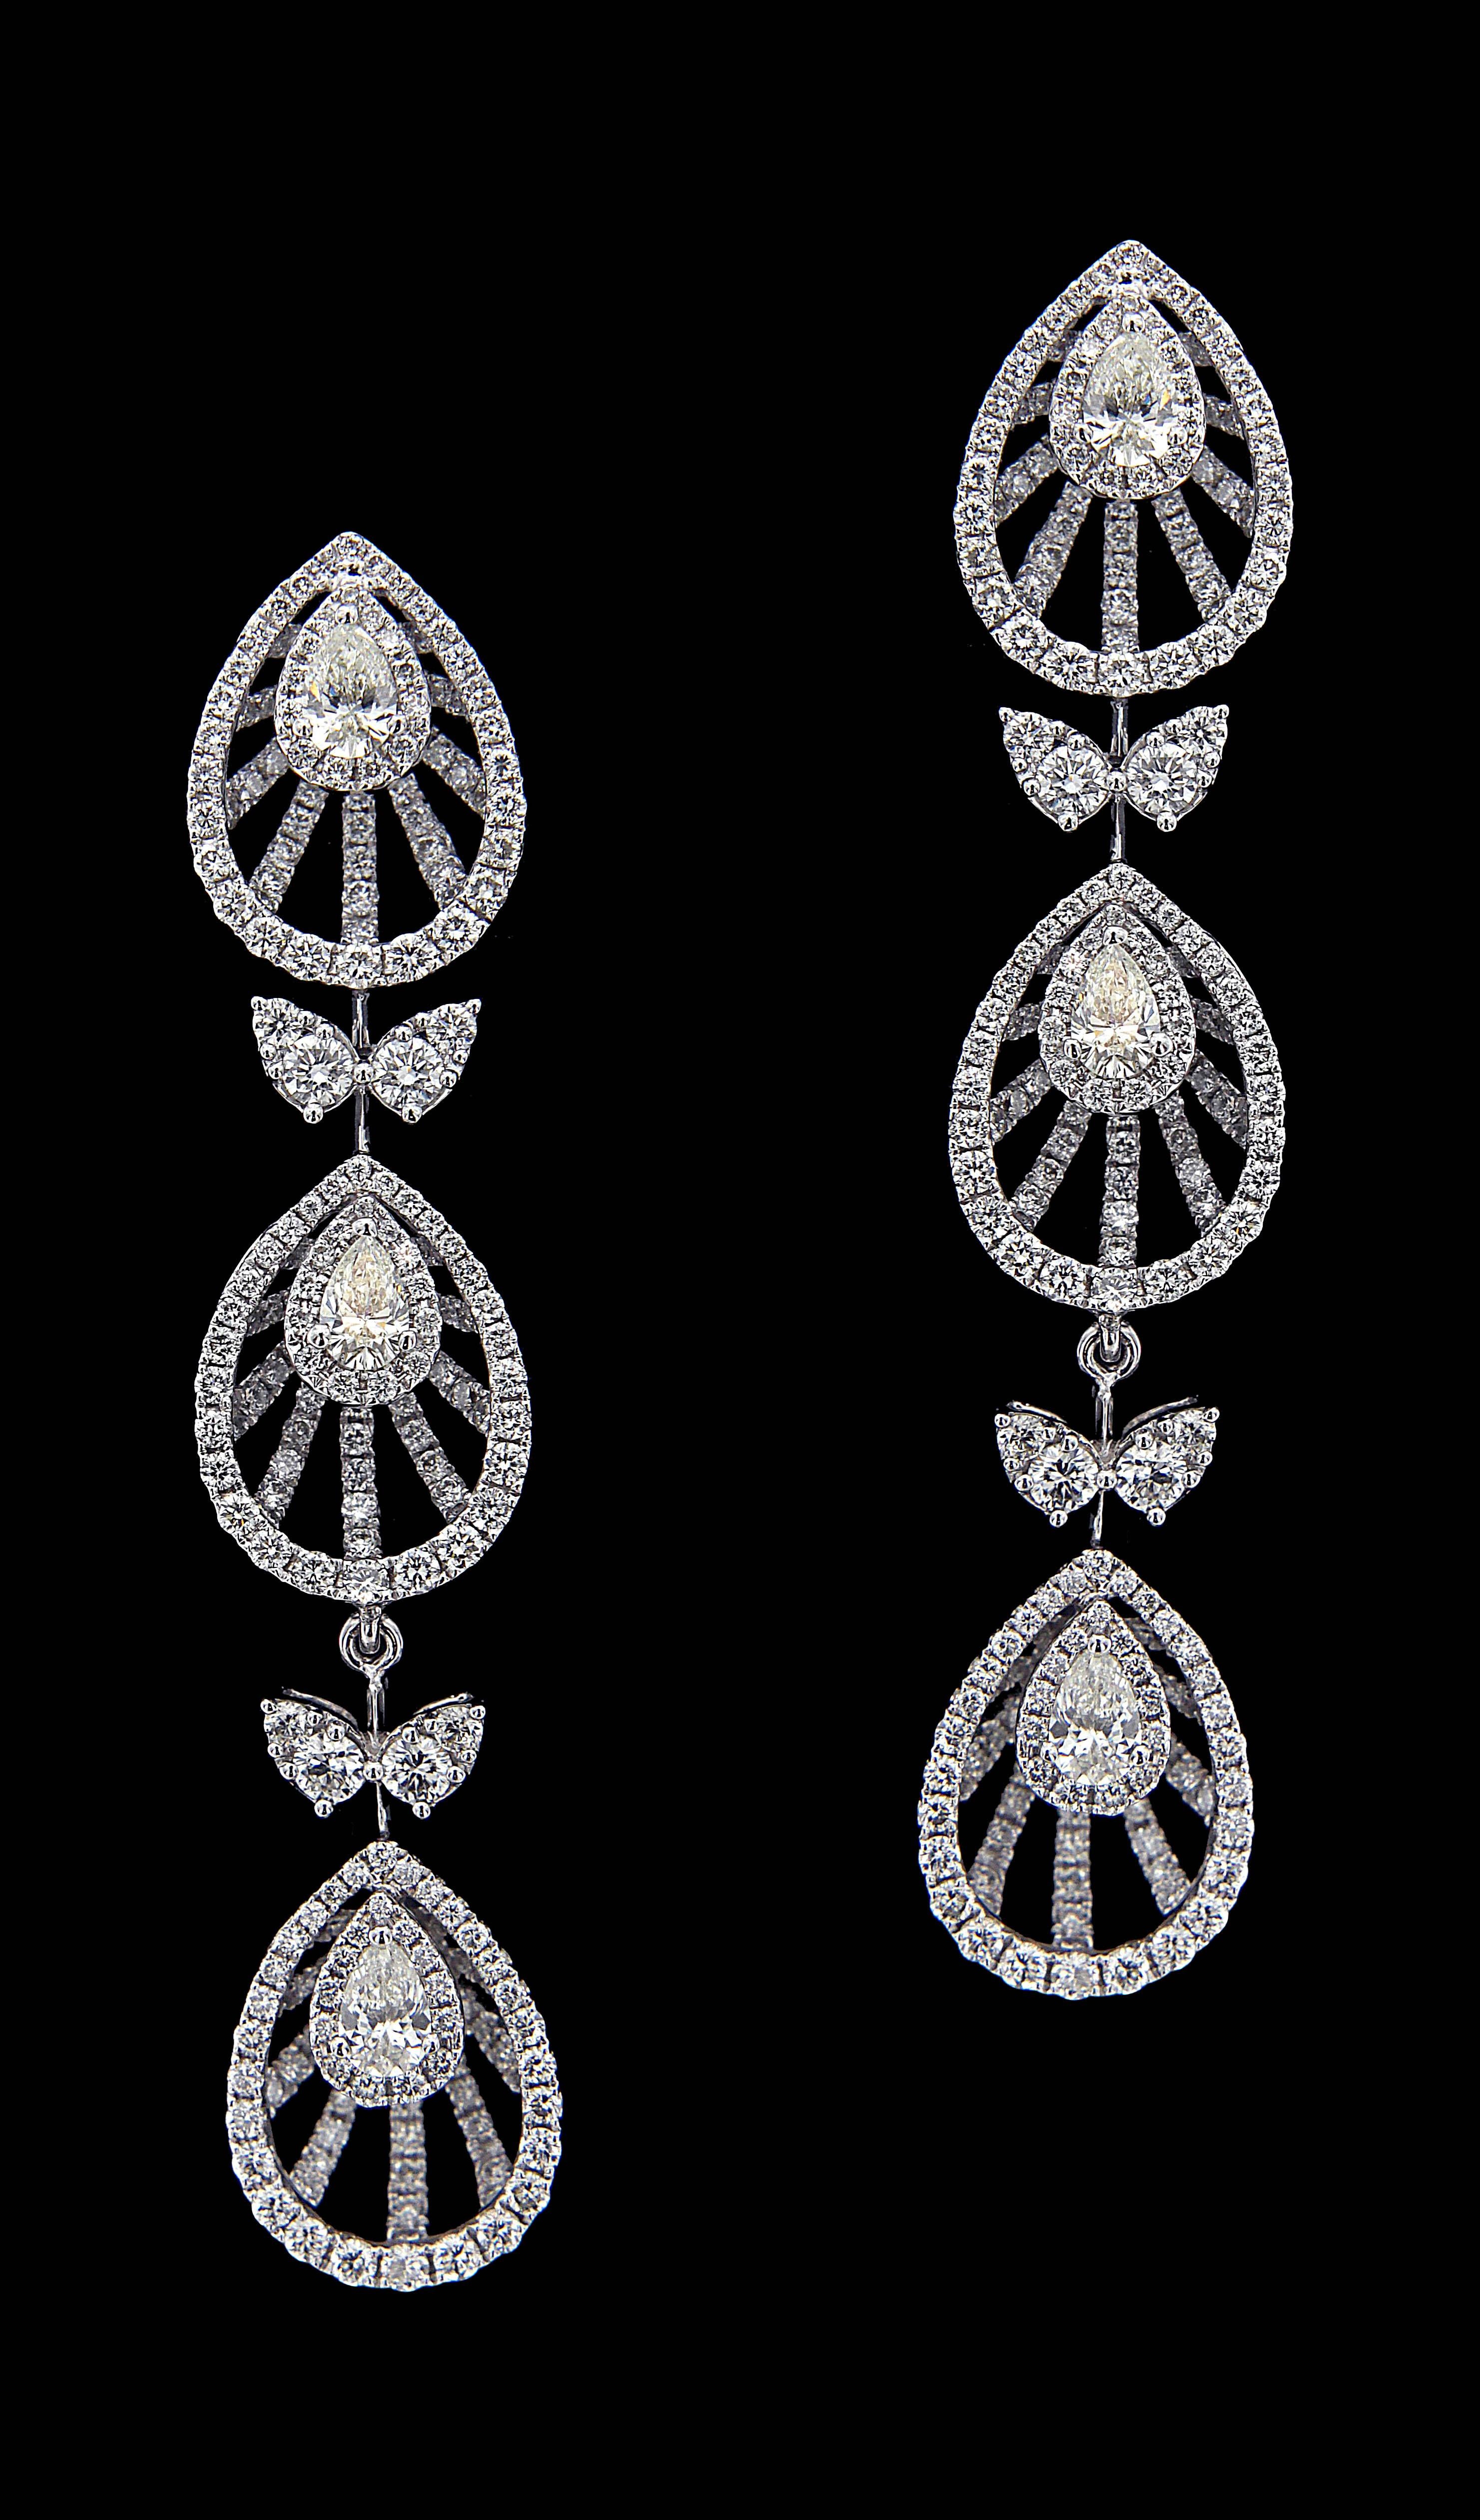 Pear Cut Scintillating 18 Karat White Gold and Diamond Wedding and Engagement Earrings For Sale